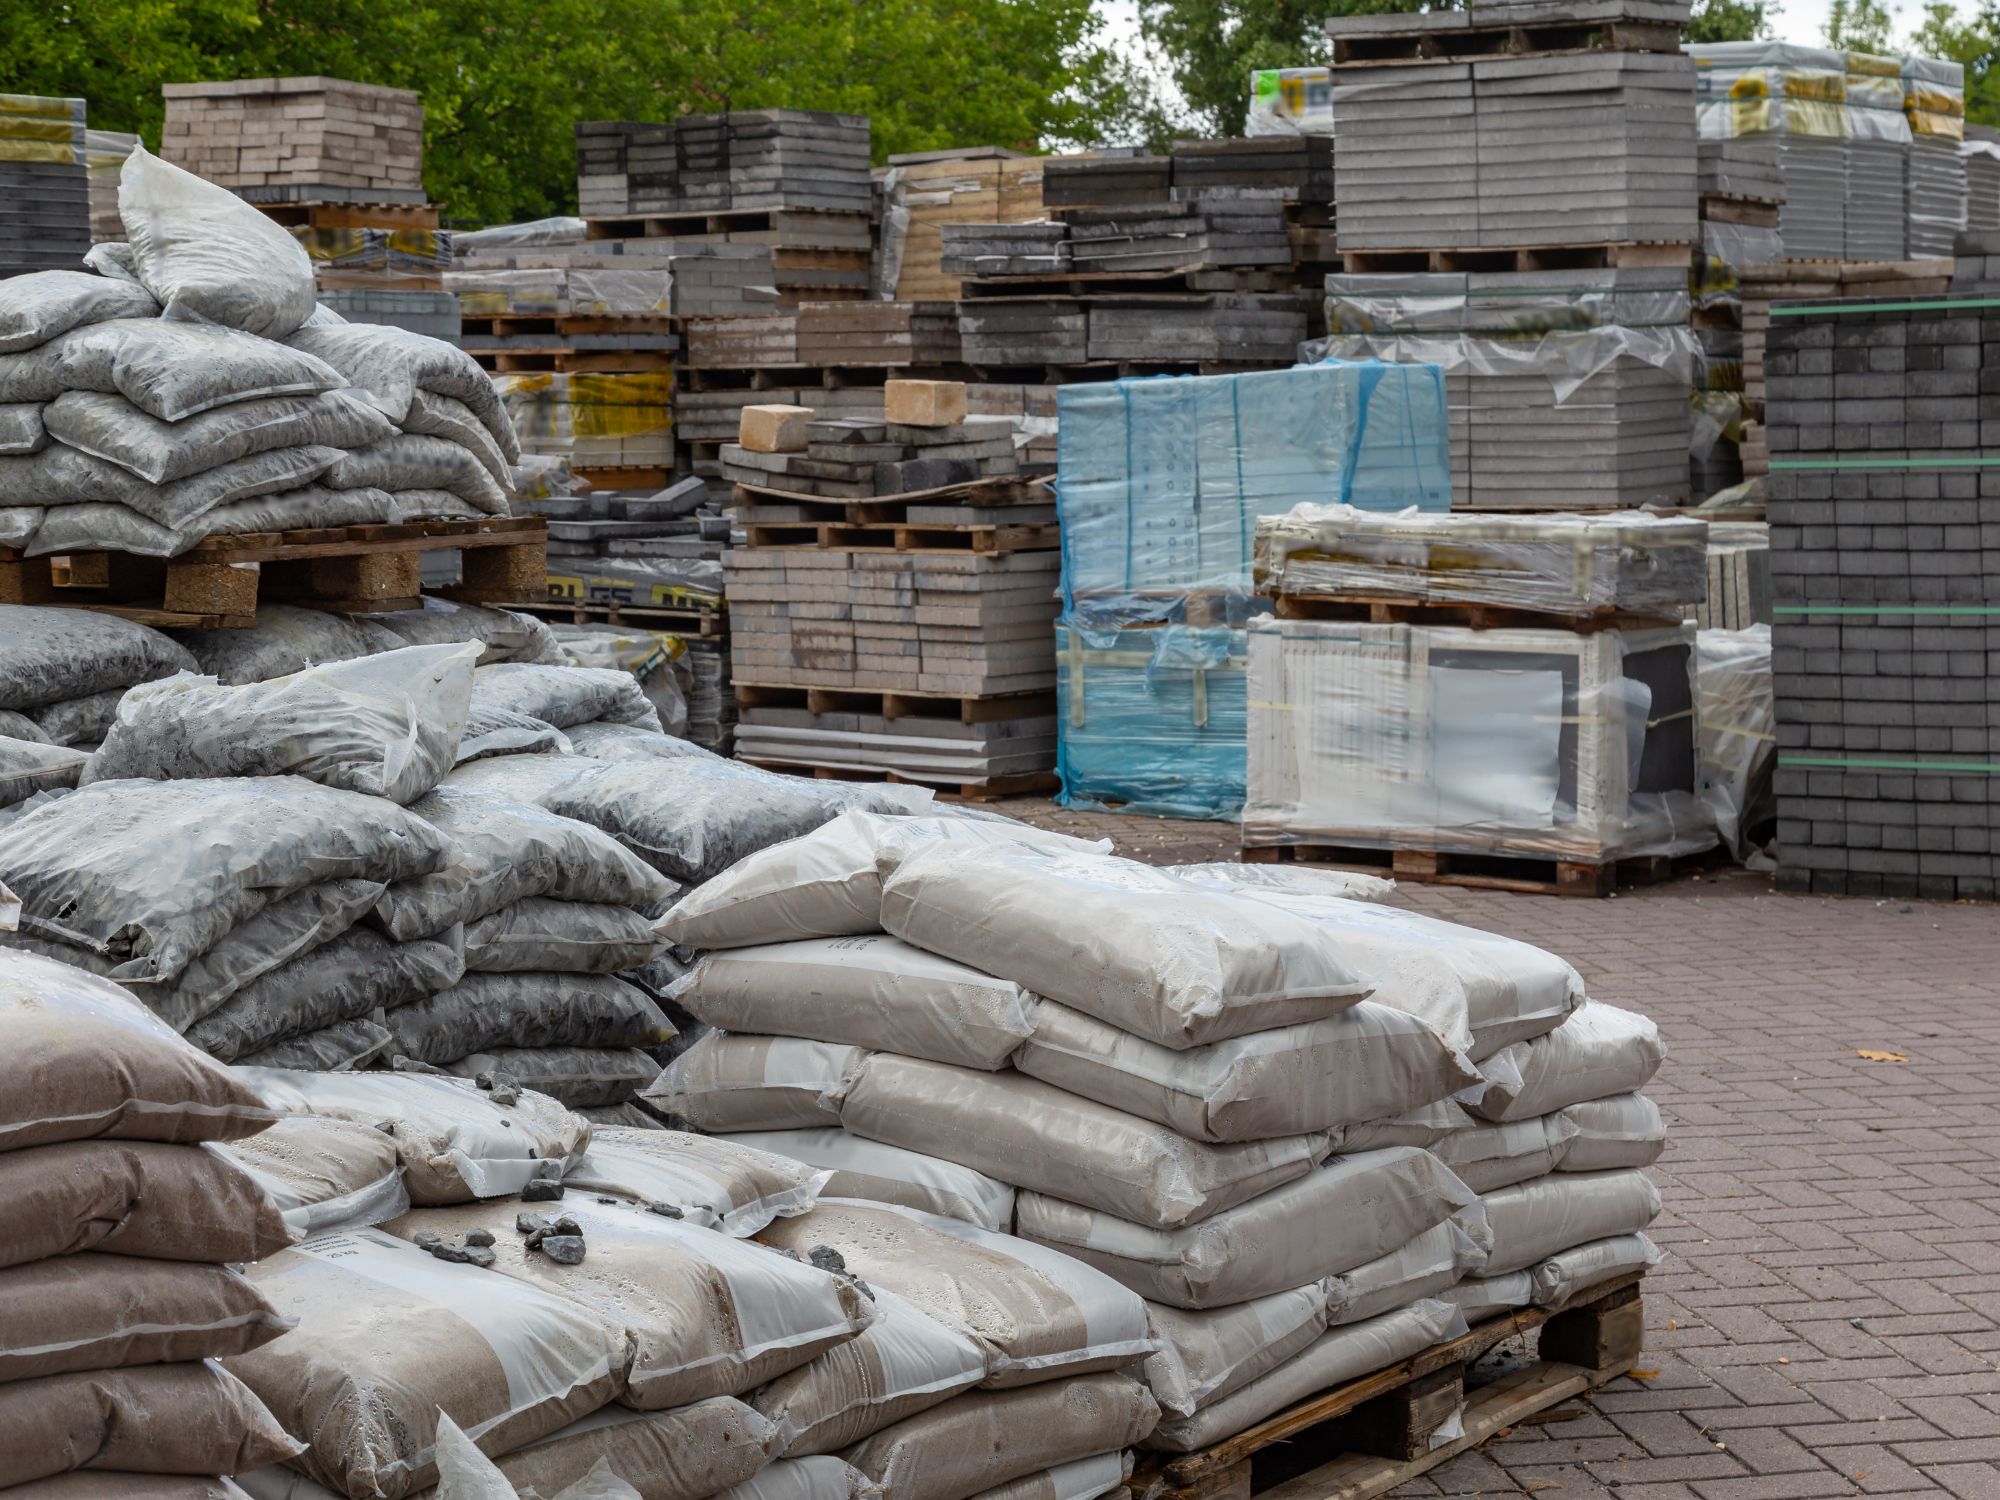 An image showing a materials yard.